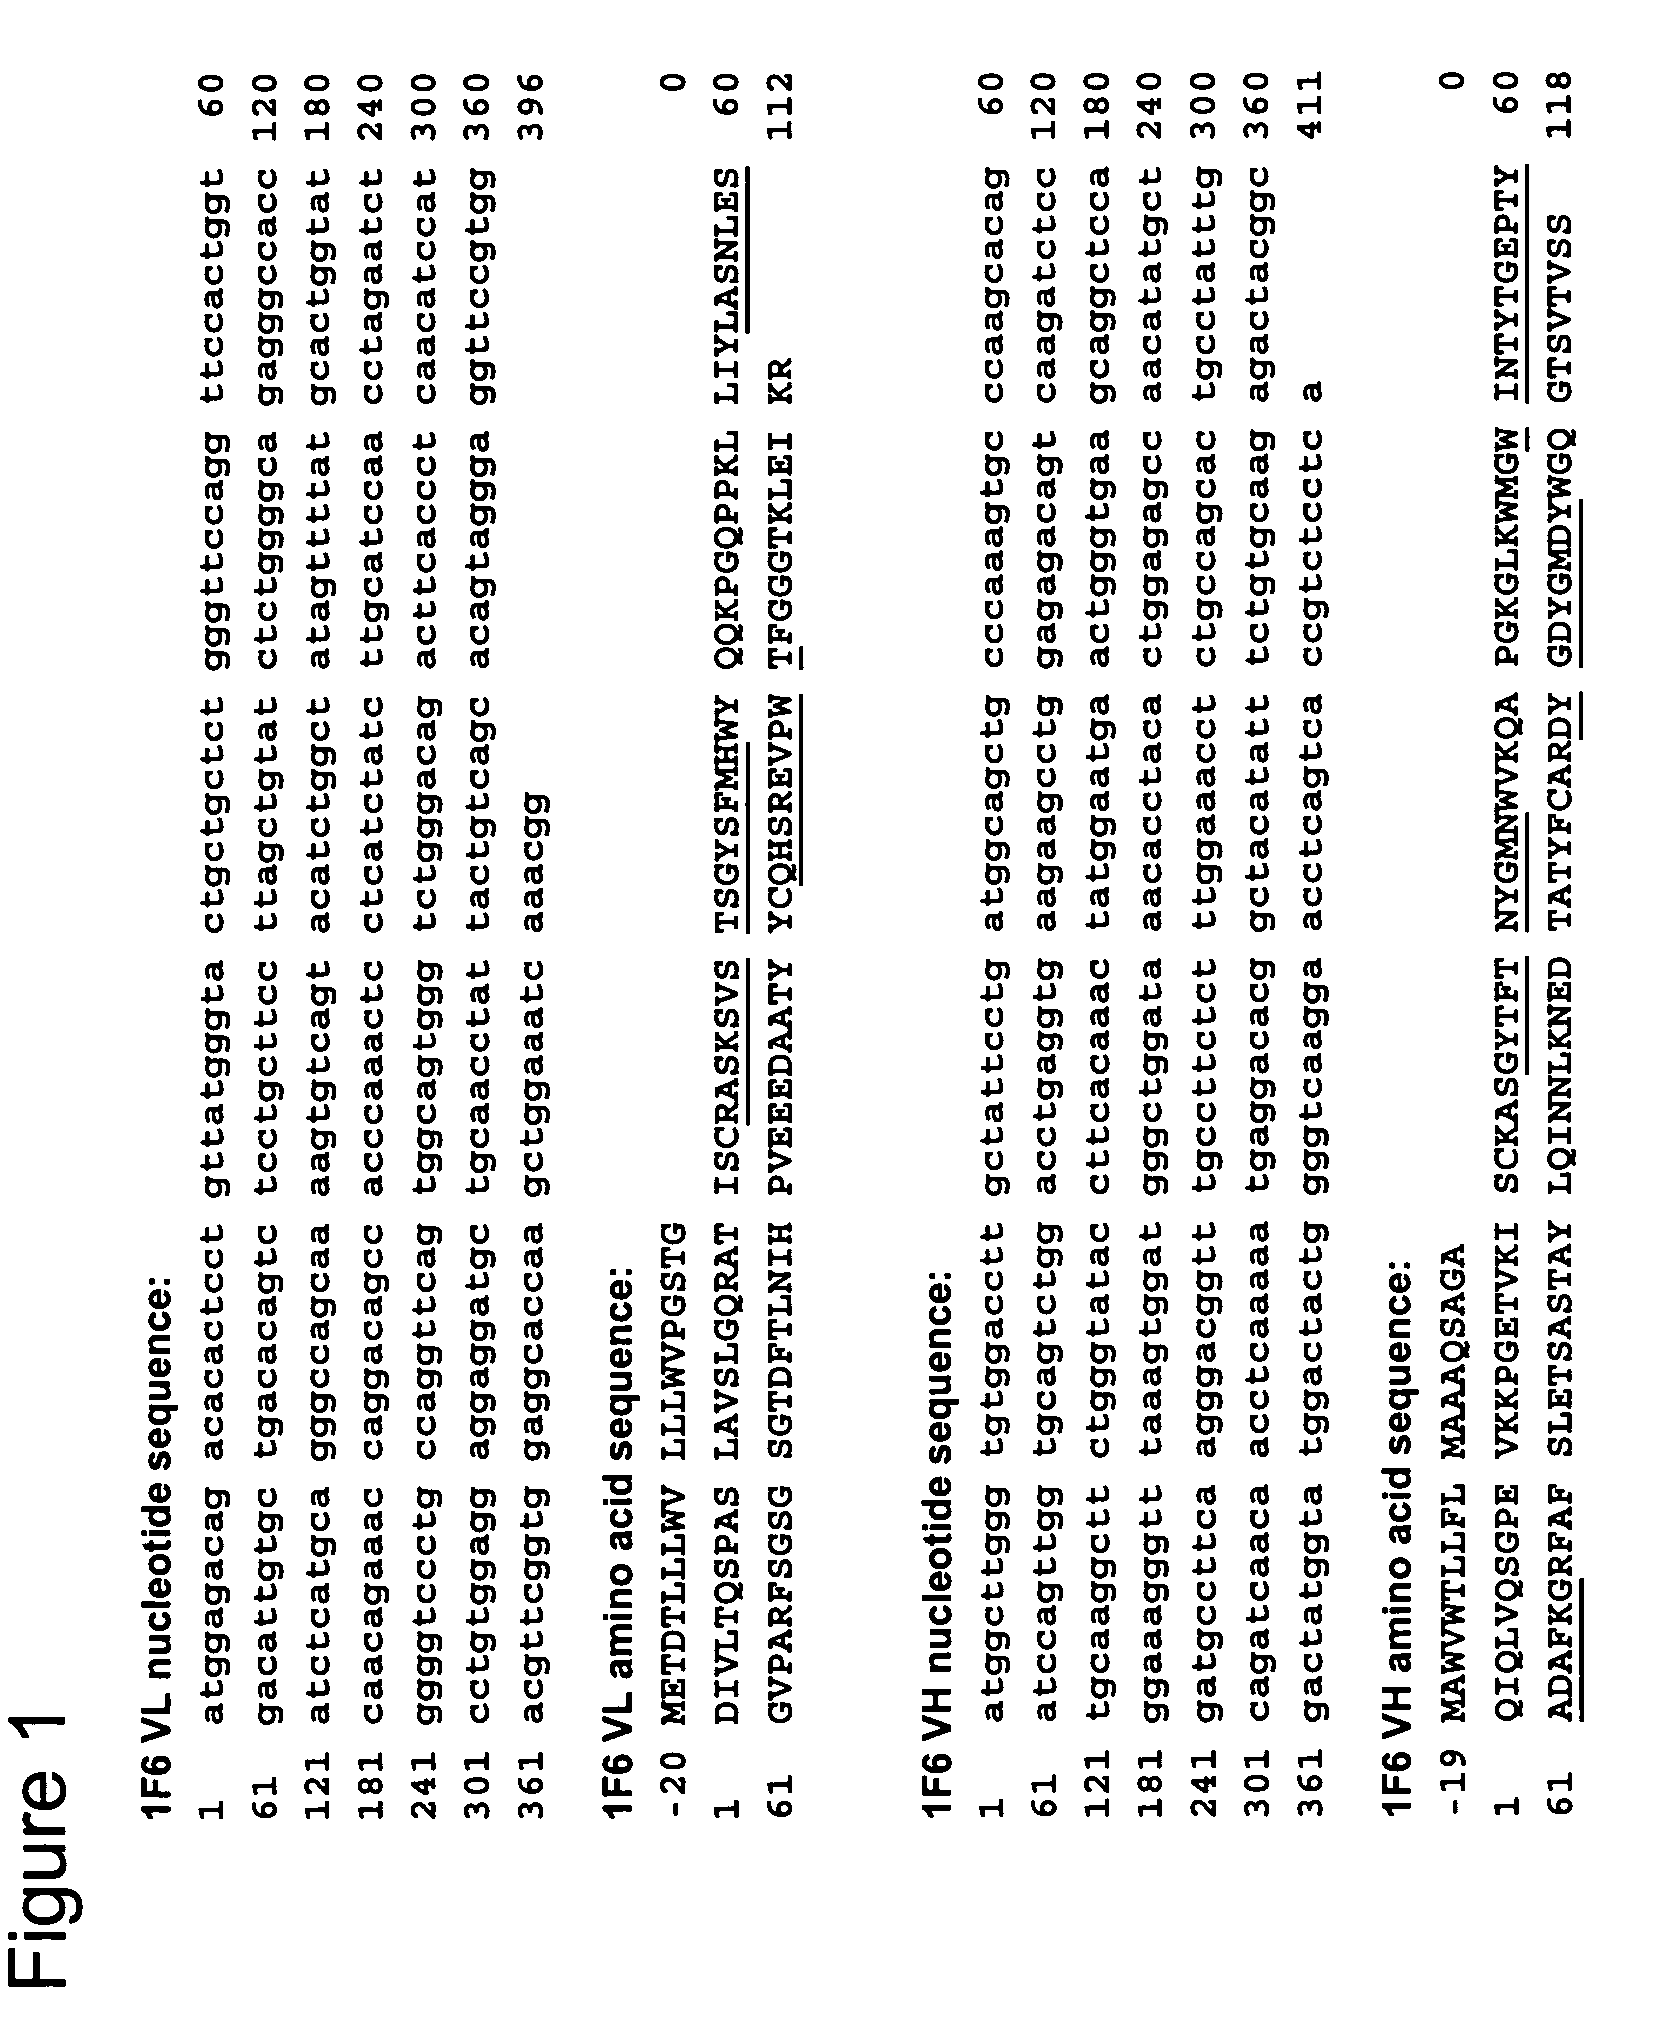 Anti-CD70 antibody and its use for the treatment and prevention of cancer and immune disorders